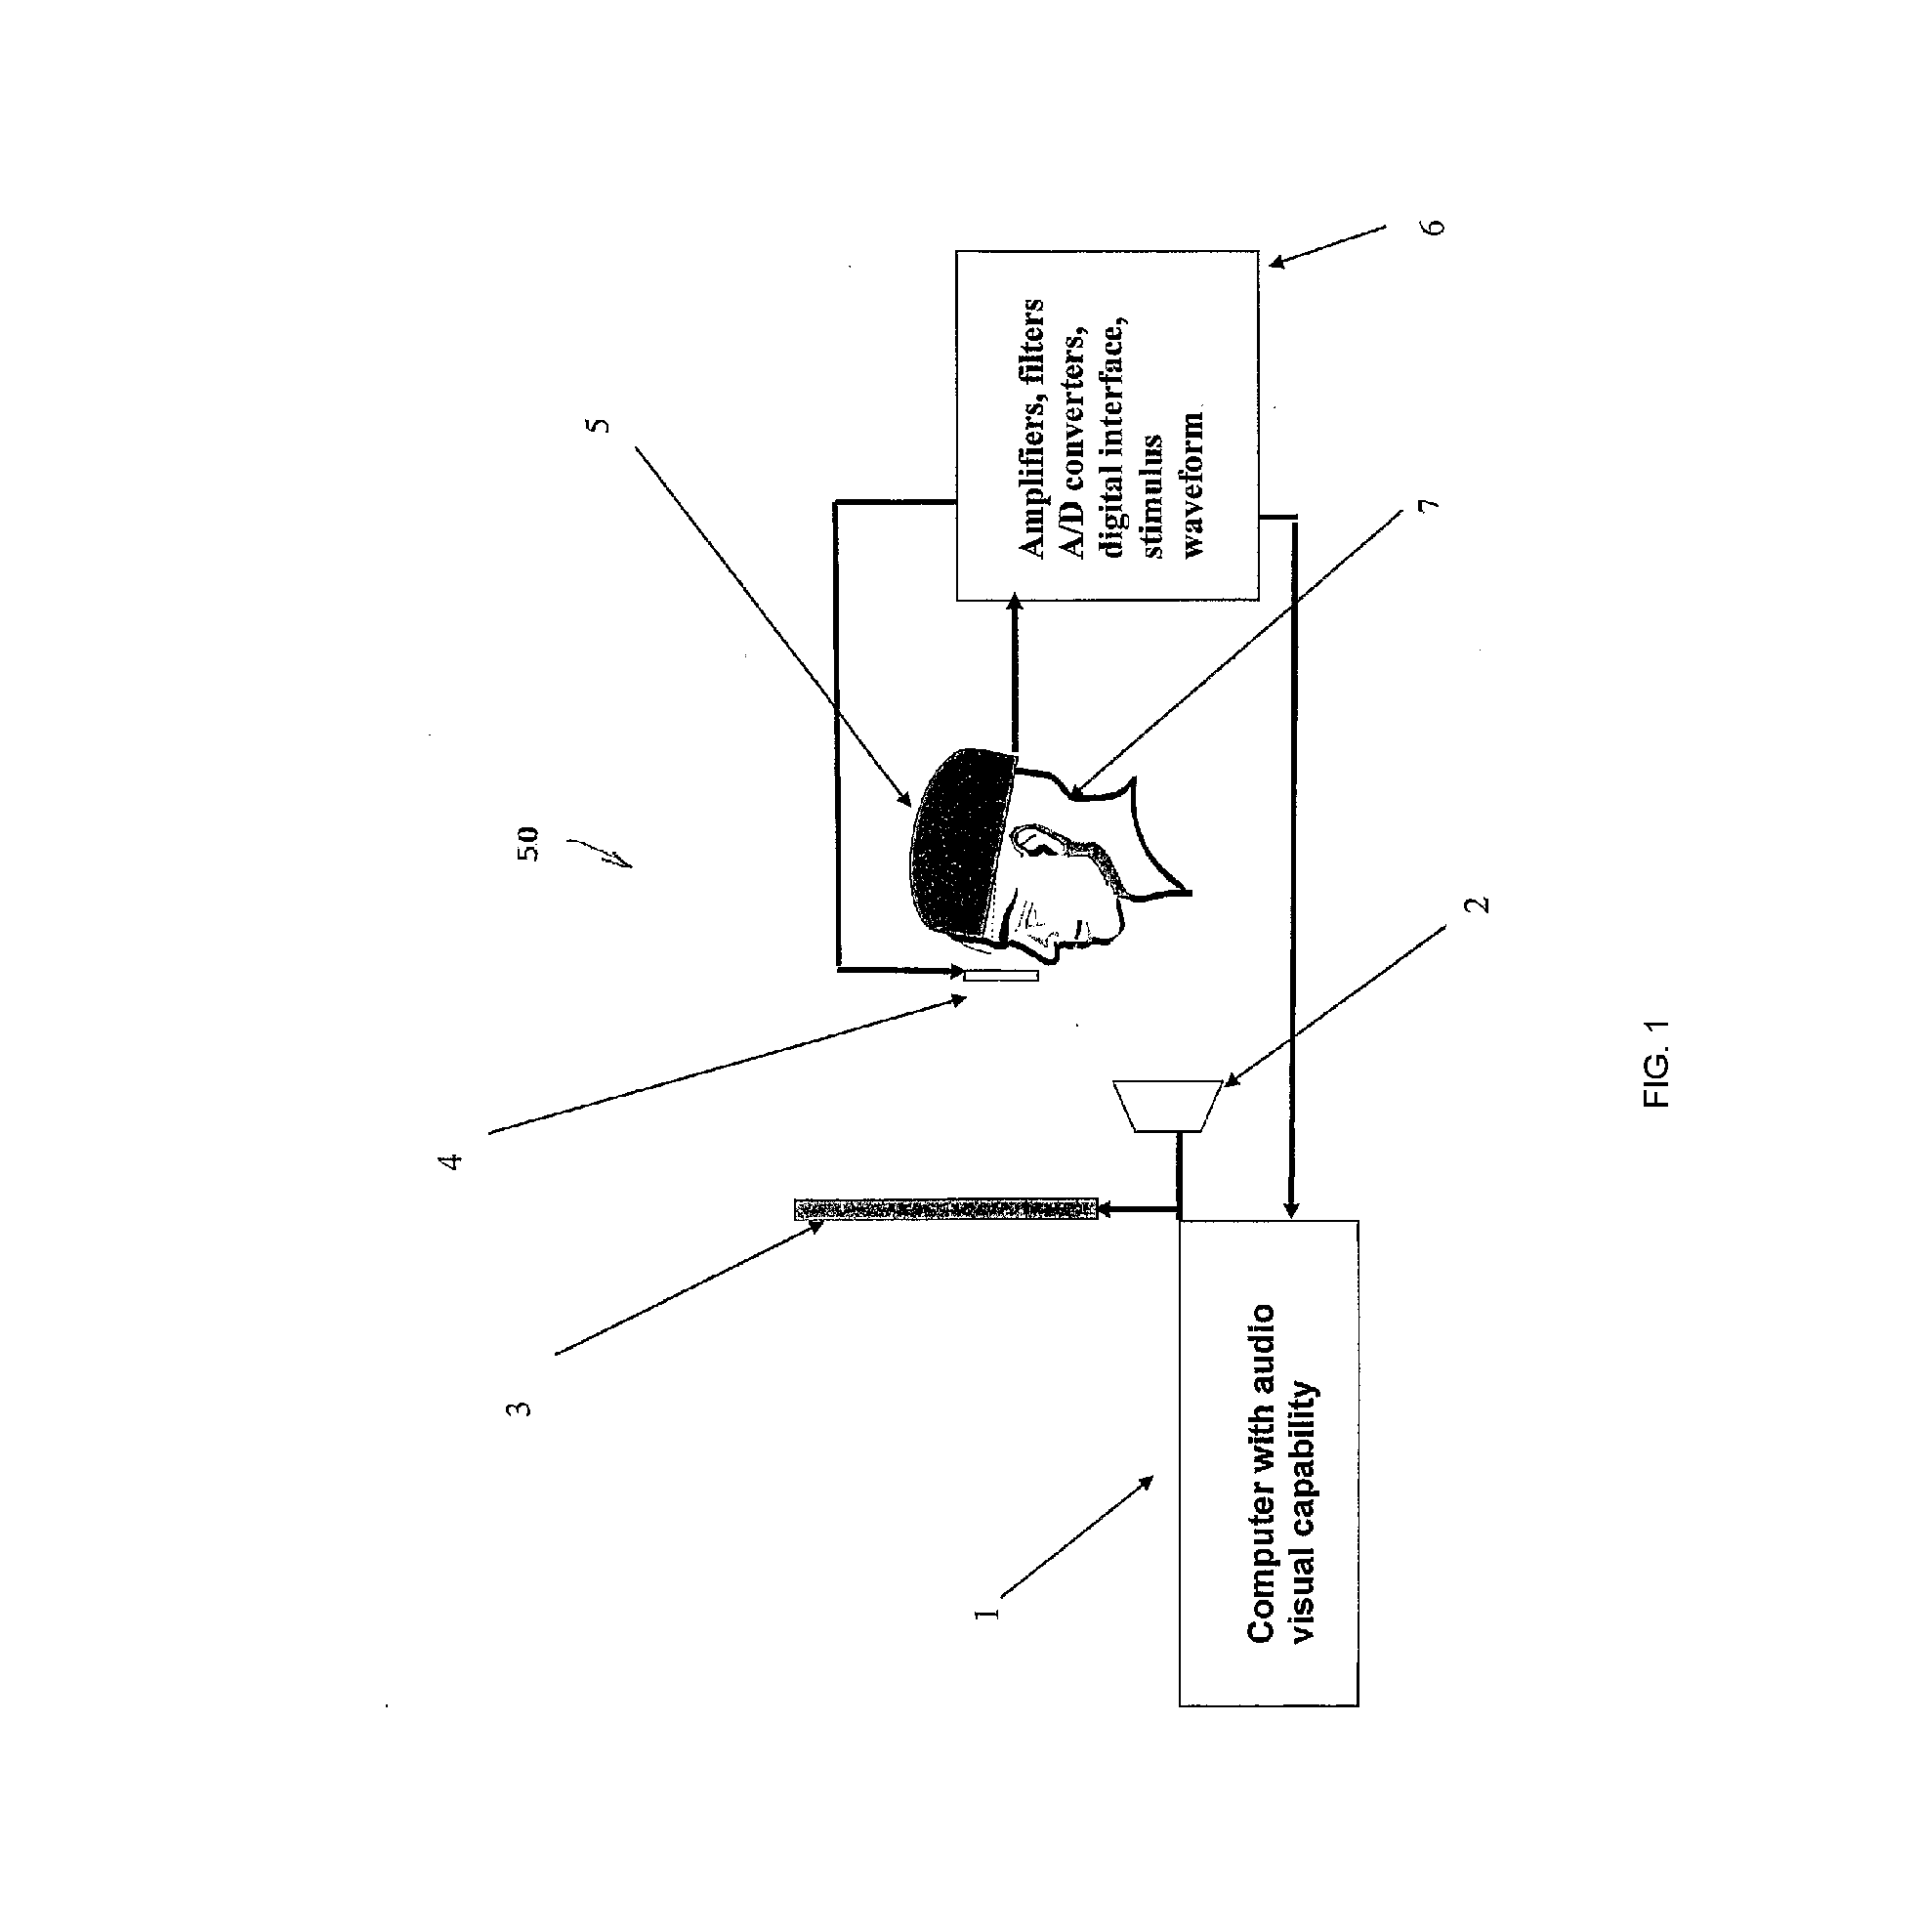 Psychological Evaluation and Methods of Use